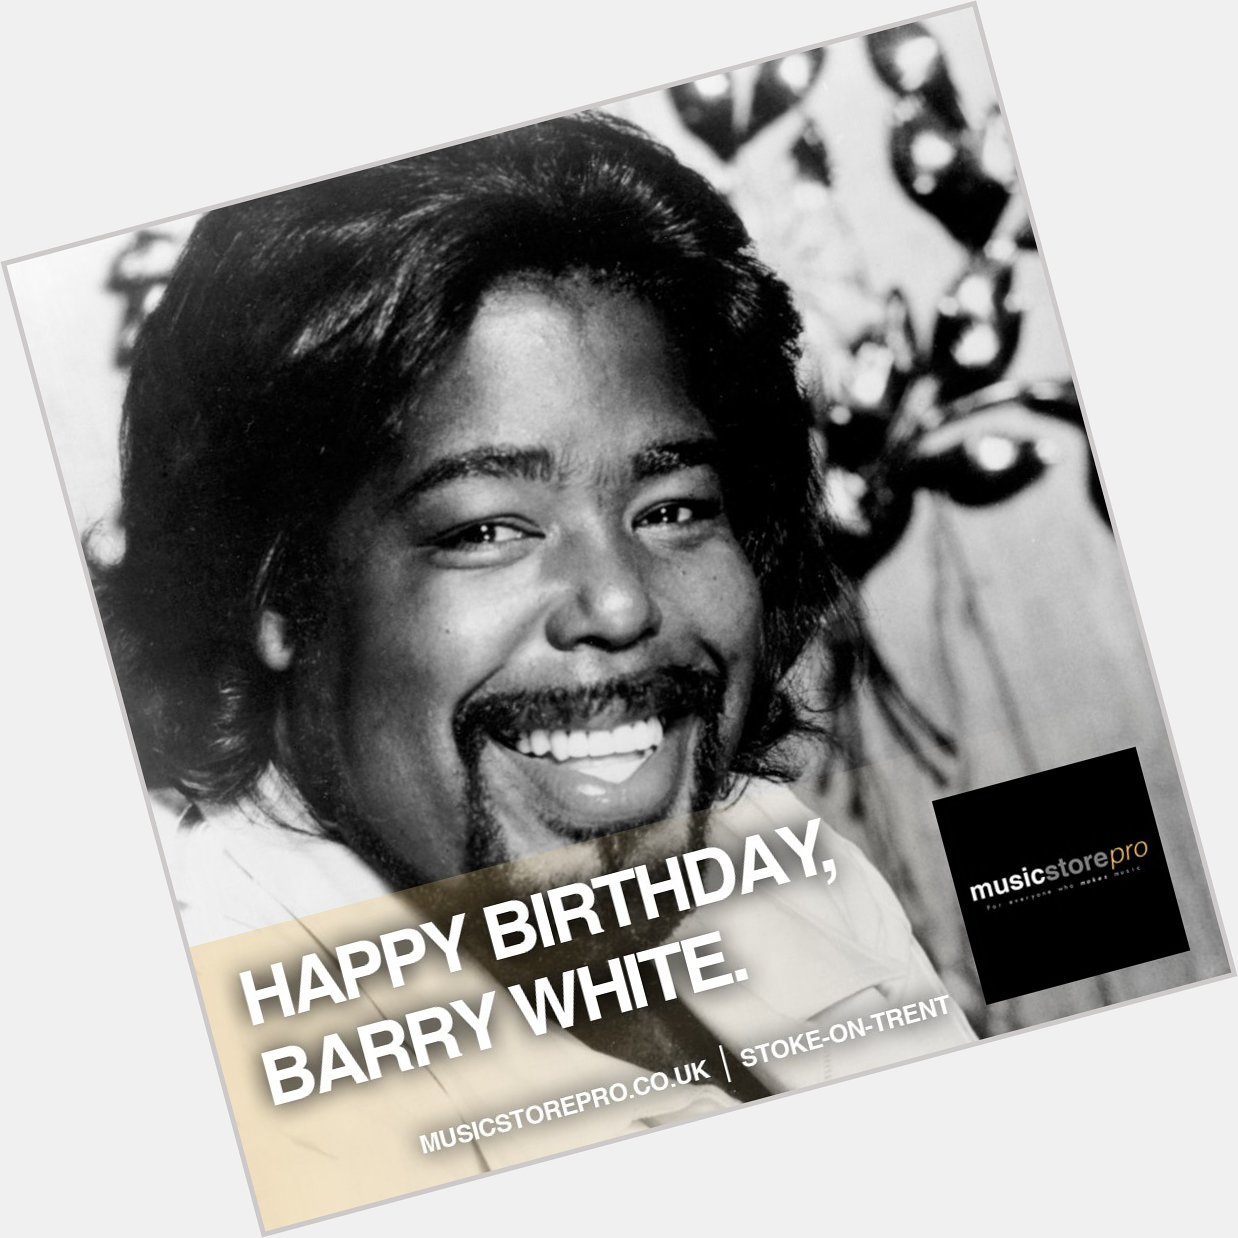 Barry White would have been 73 Years Old Today. Happy Birthday, Barry. 